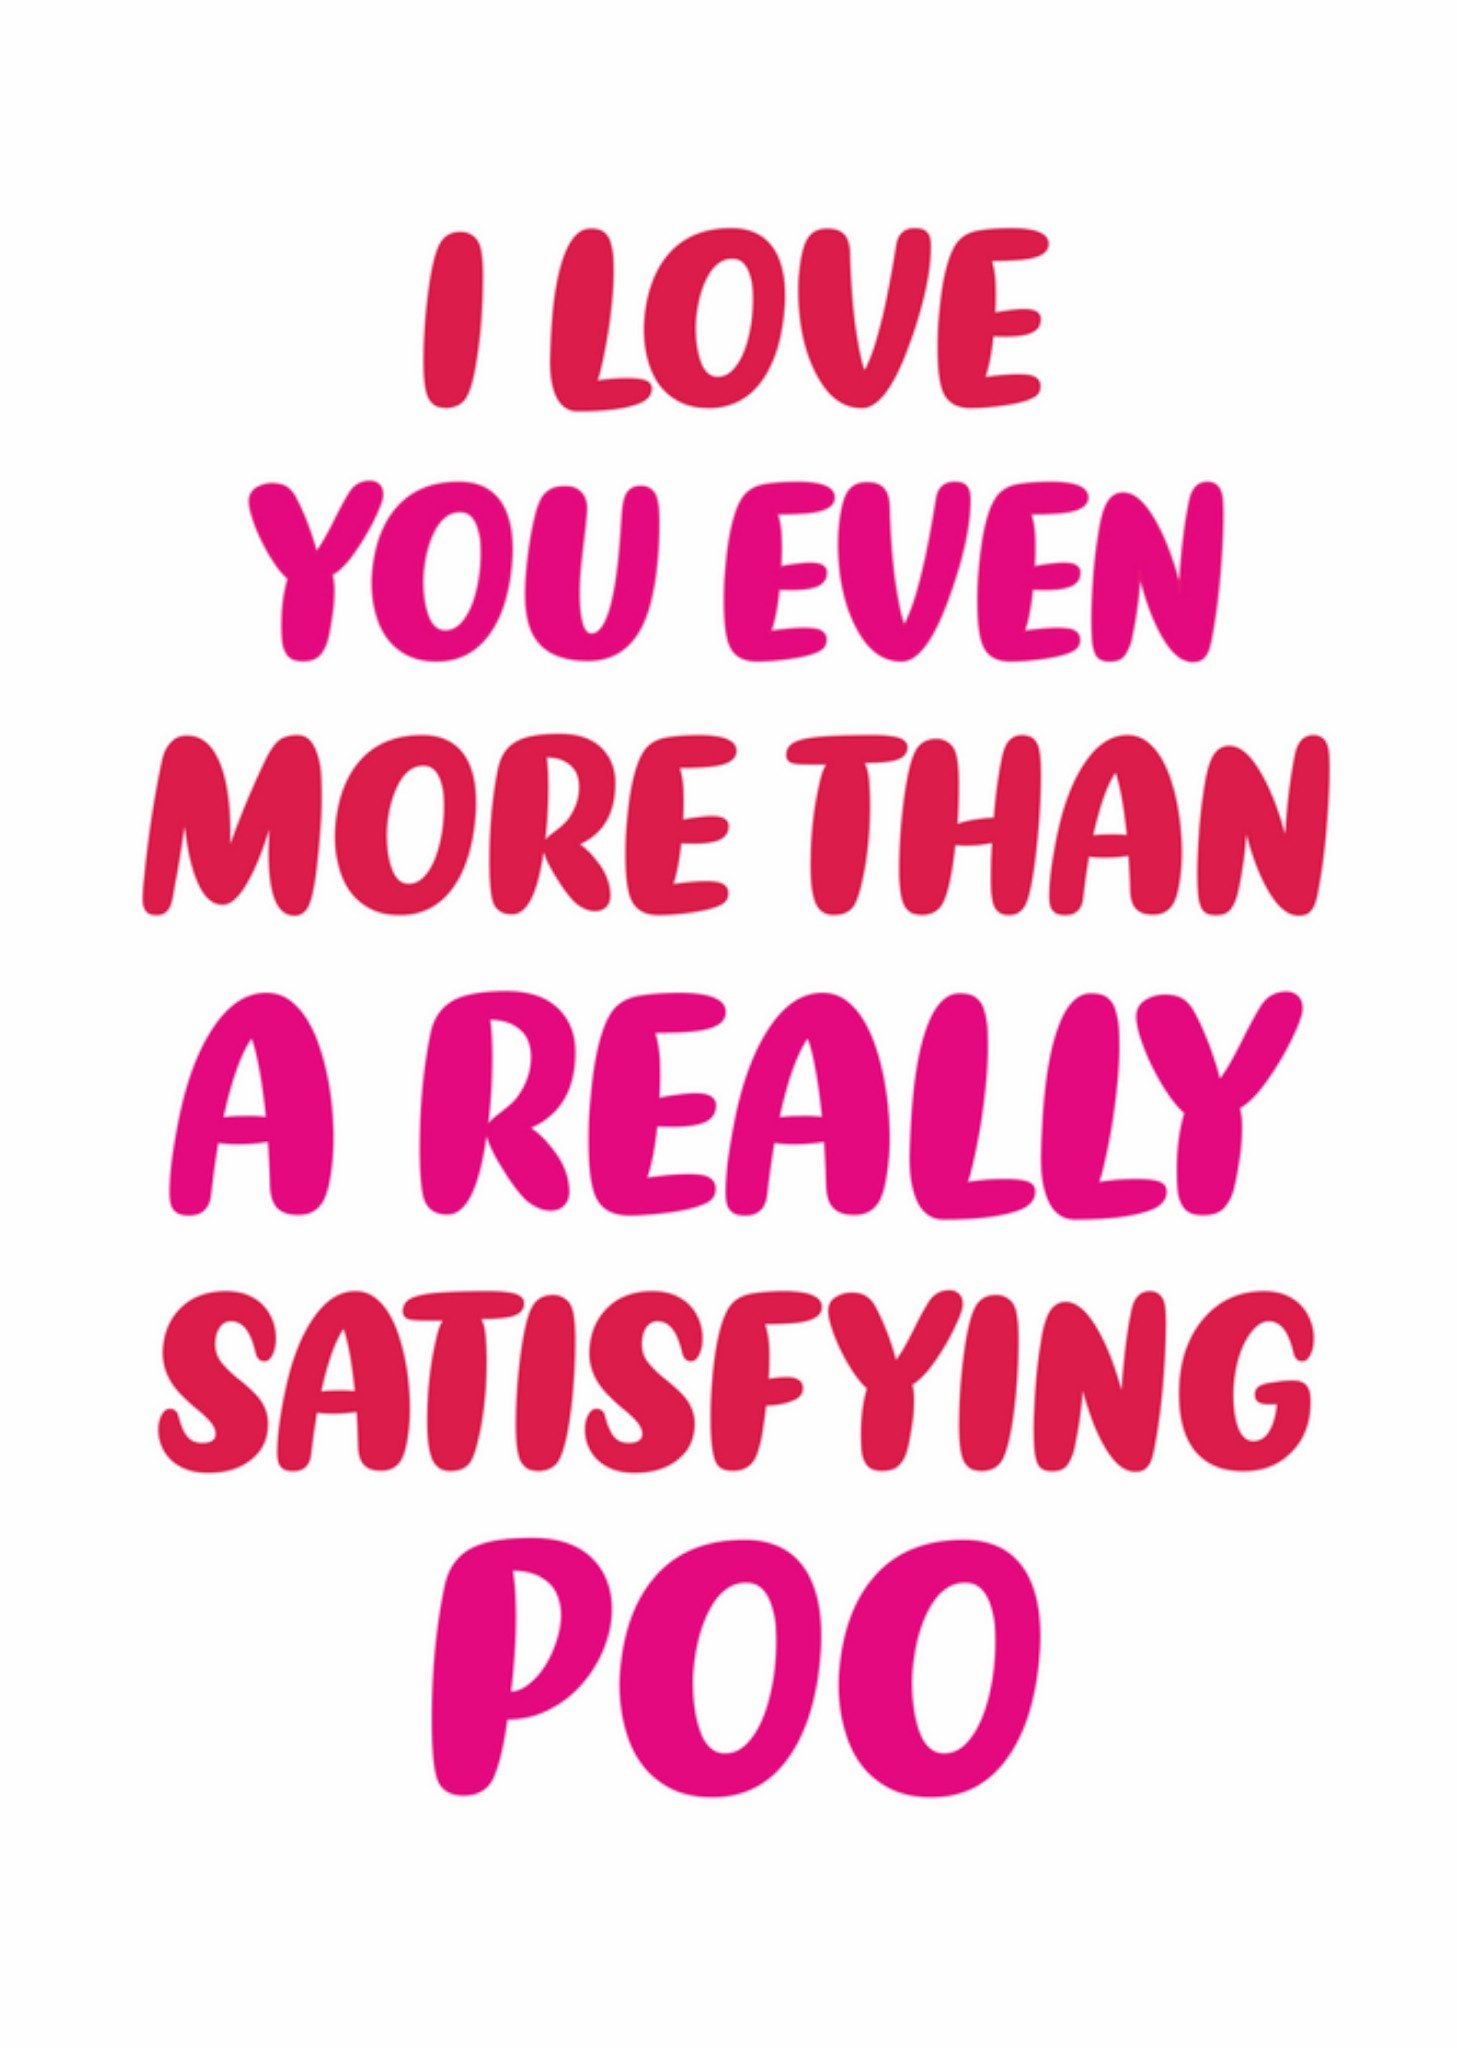 Moonpig Cheeky And Hilarious I Love You Even More Than A Really Satisfying Poo Typography Valentine'